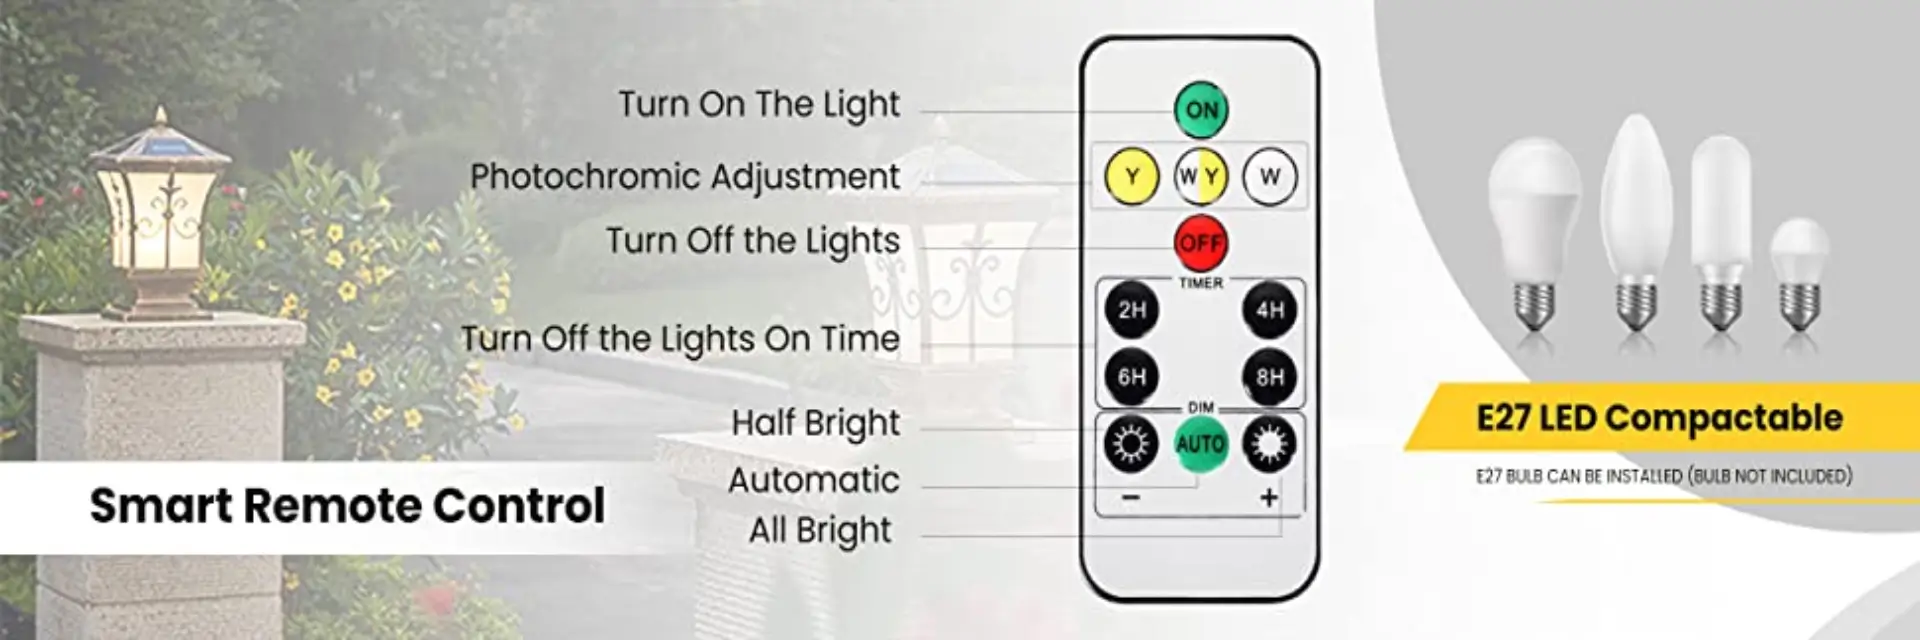 solar powered antique lamp remote control specifications